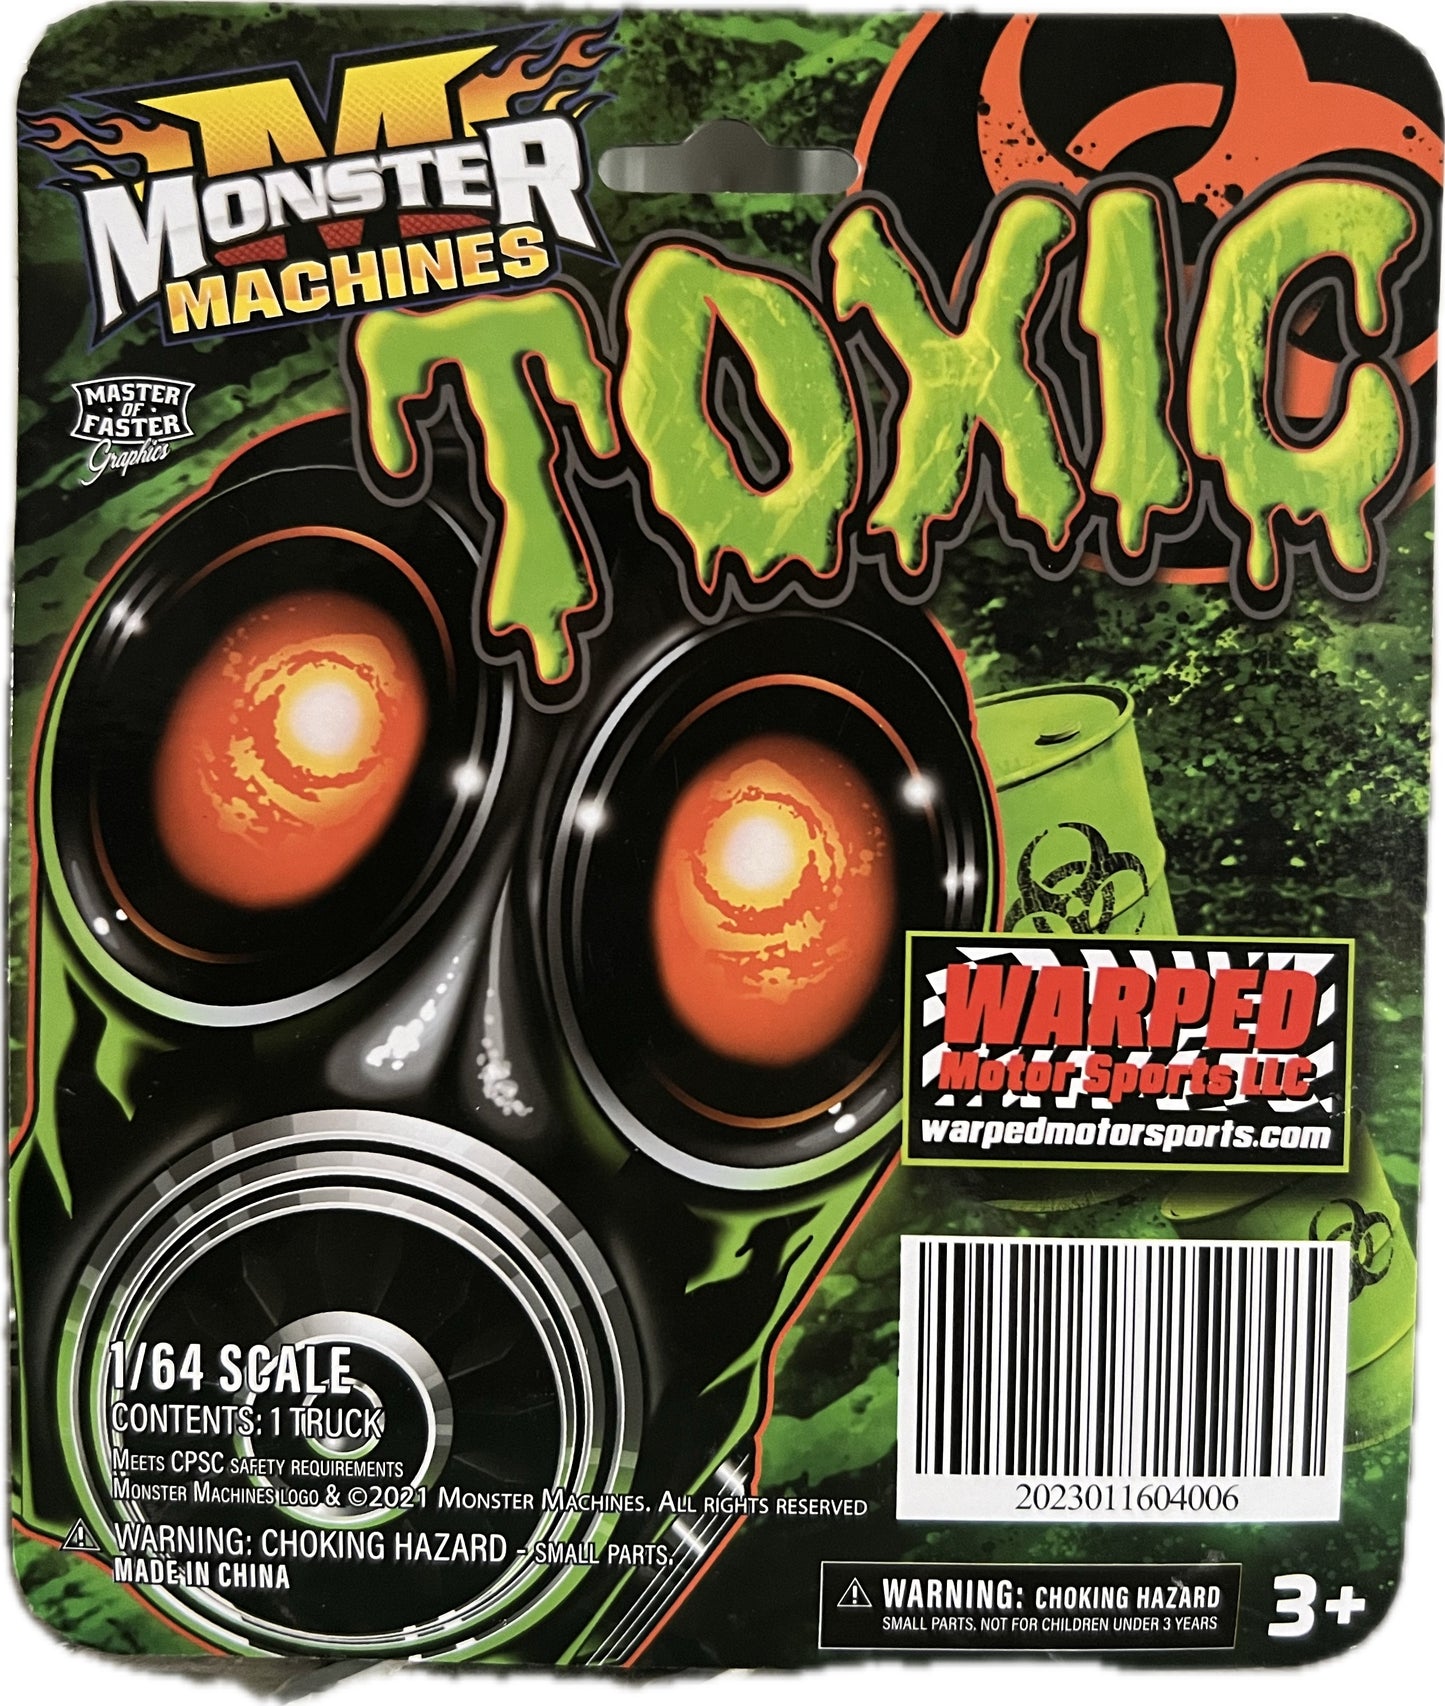 Toxic 1:64 Scale Die-Cast Toy